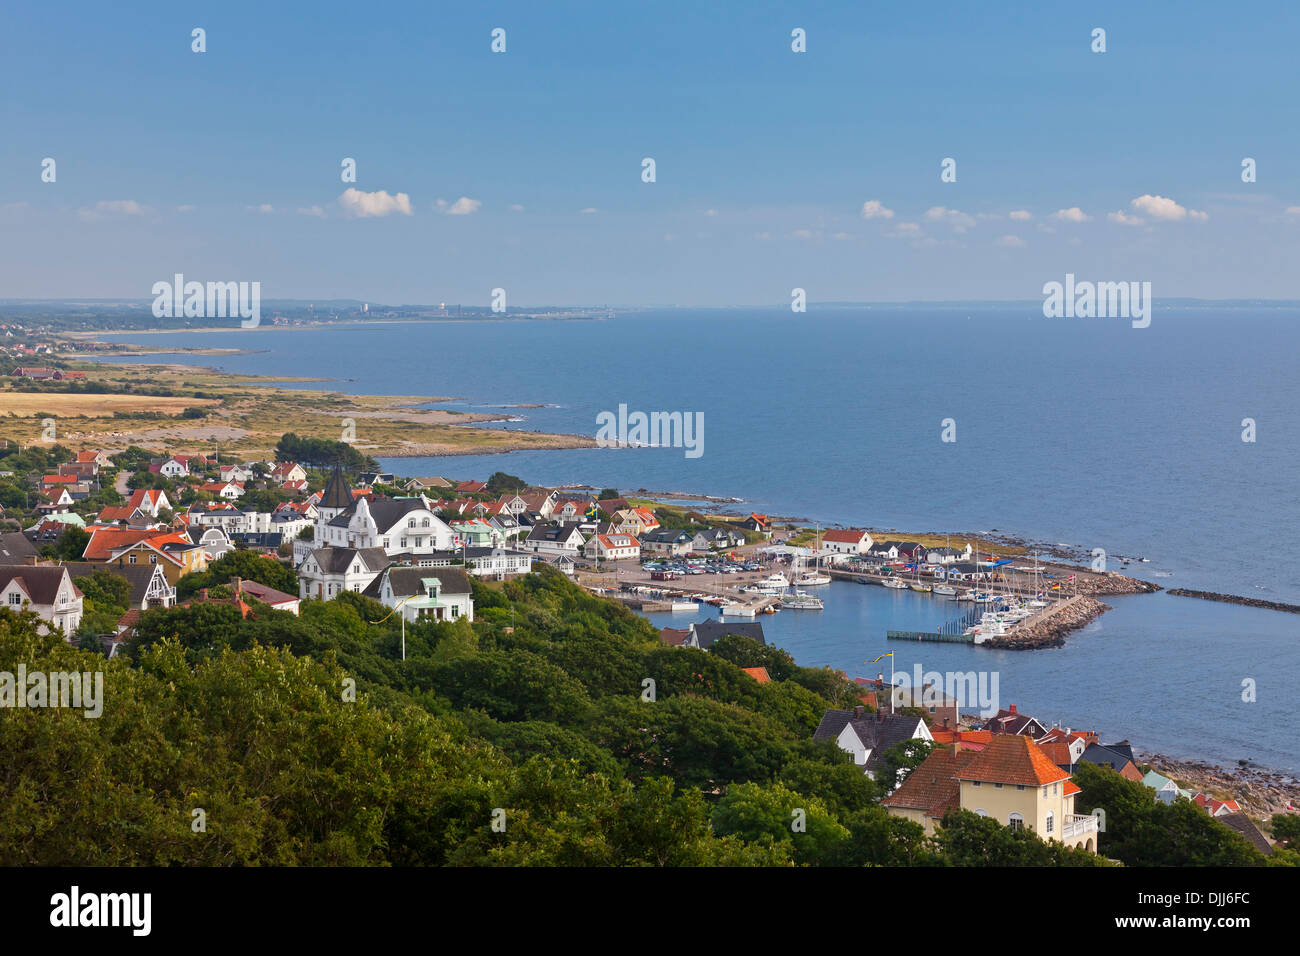 View over the harbour at Mölle in the Kattegat Strait, Skåne / Scania, Sweden, Scandinavia Stock Photo